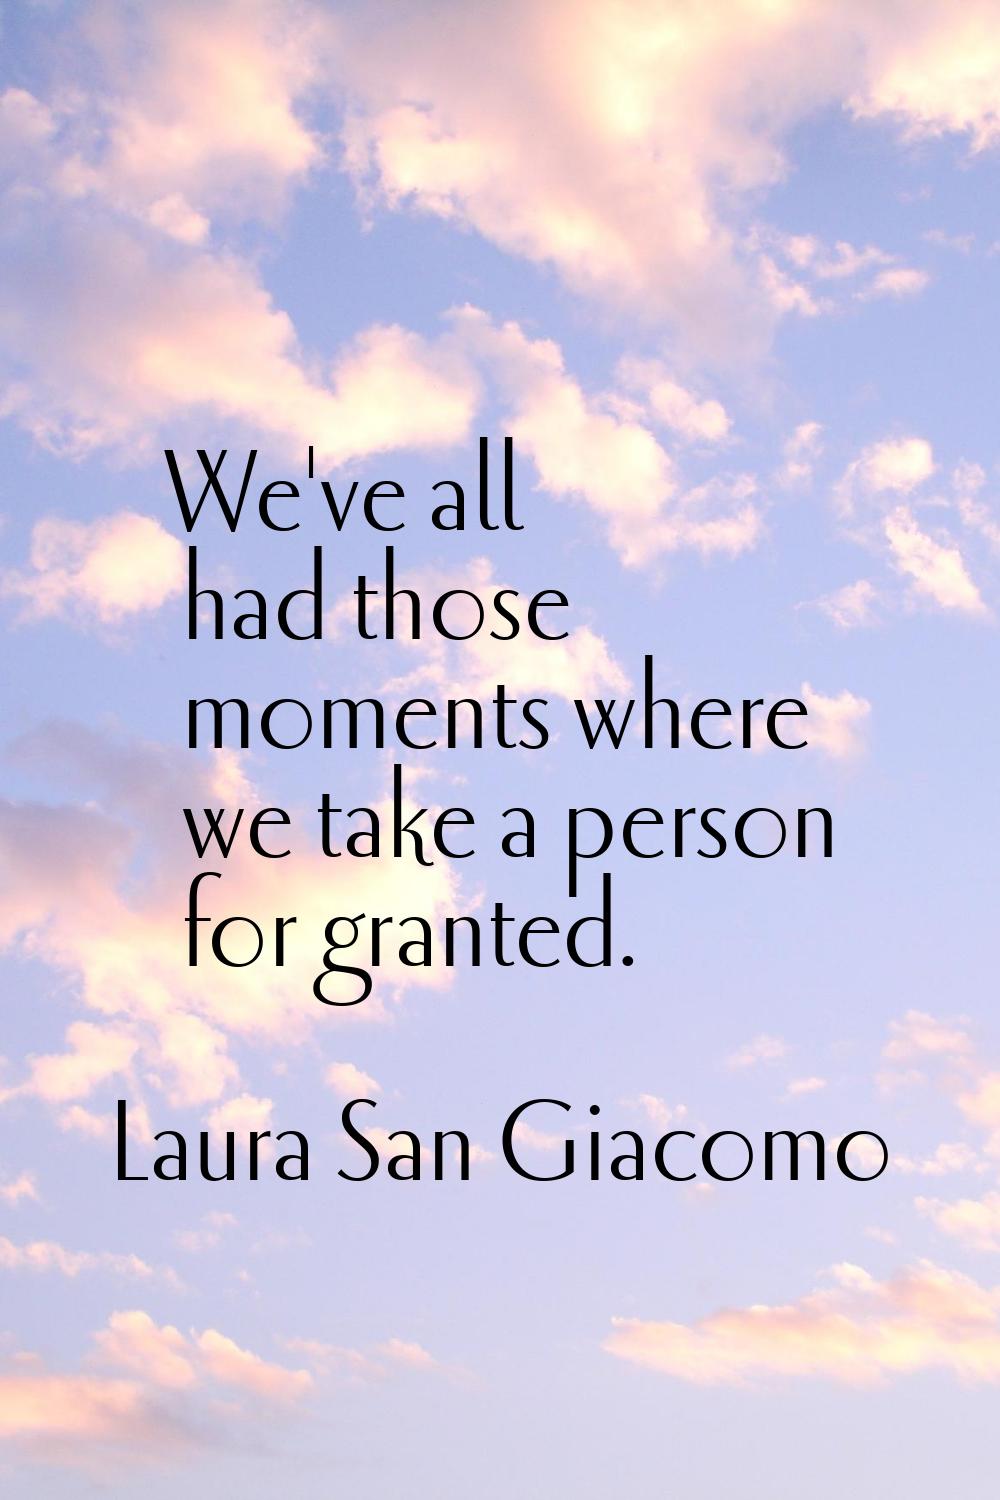 We've all had those moments where we take a person for granted.